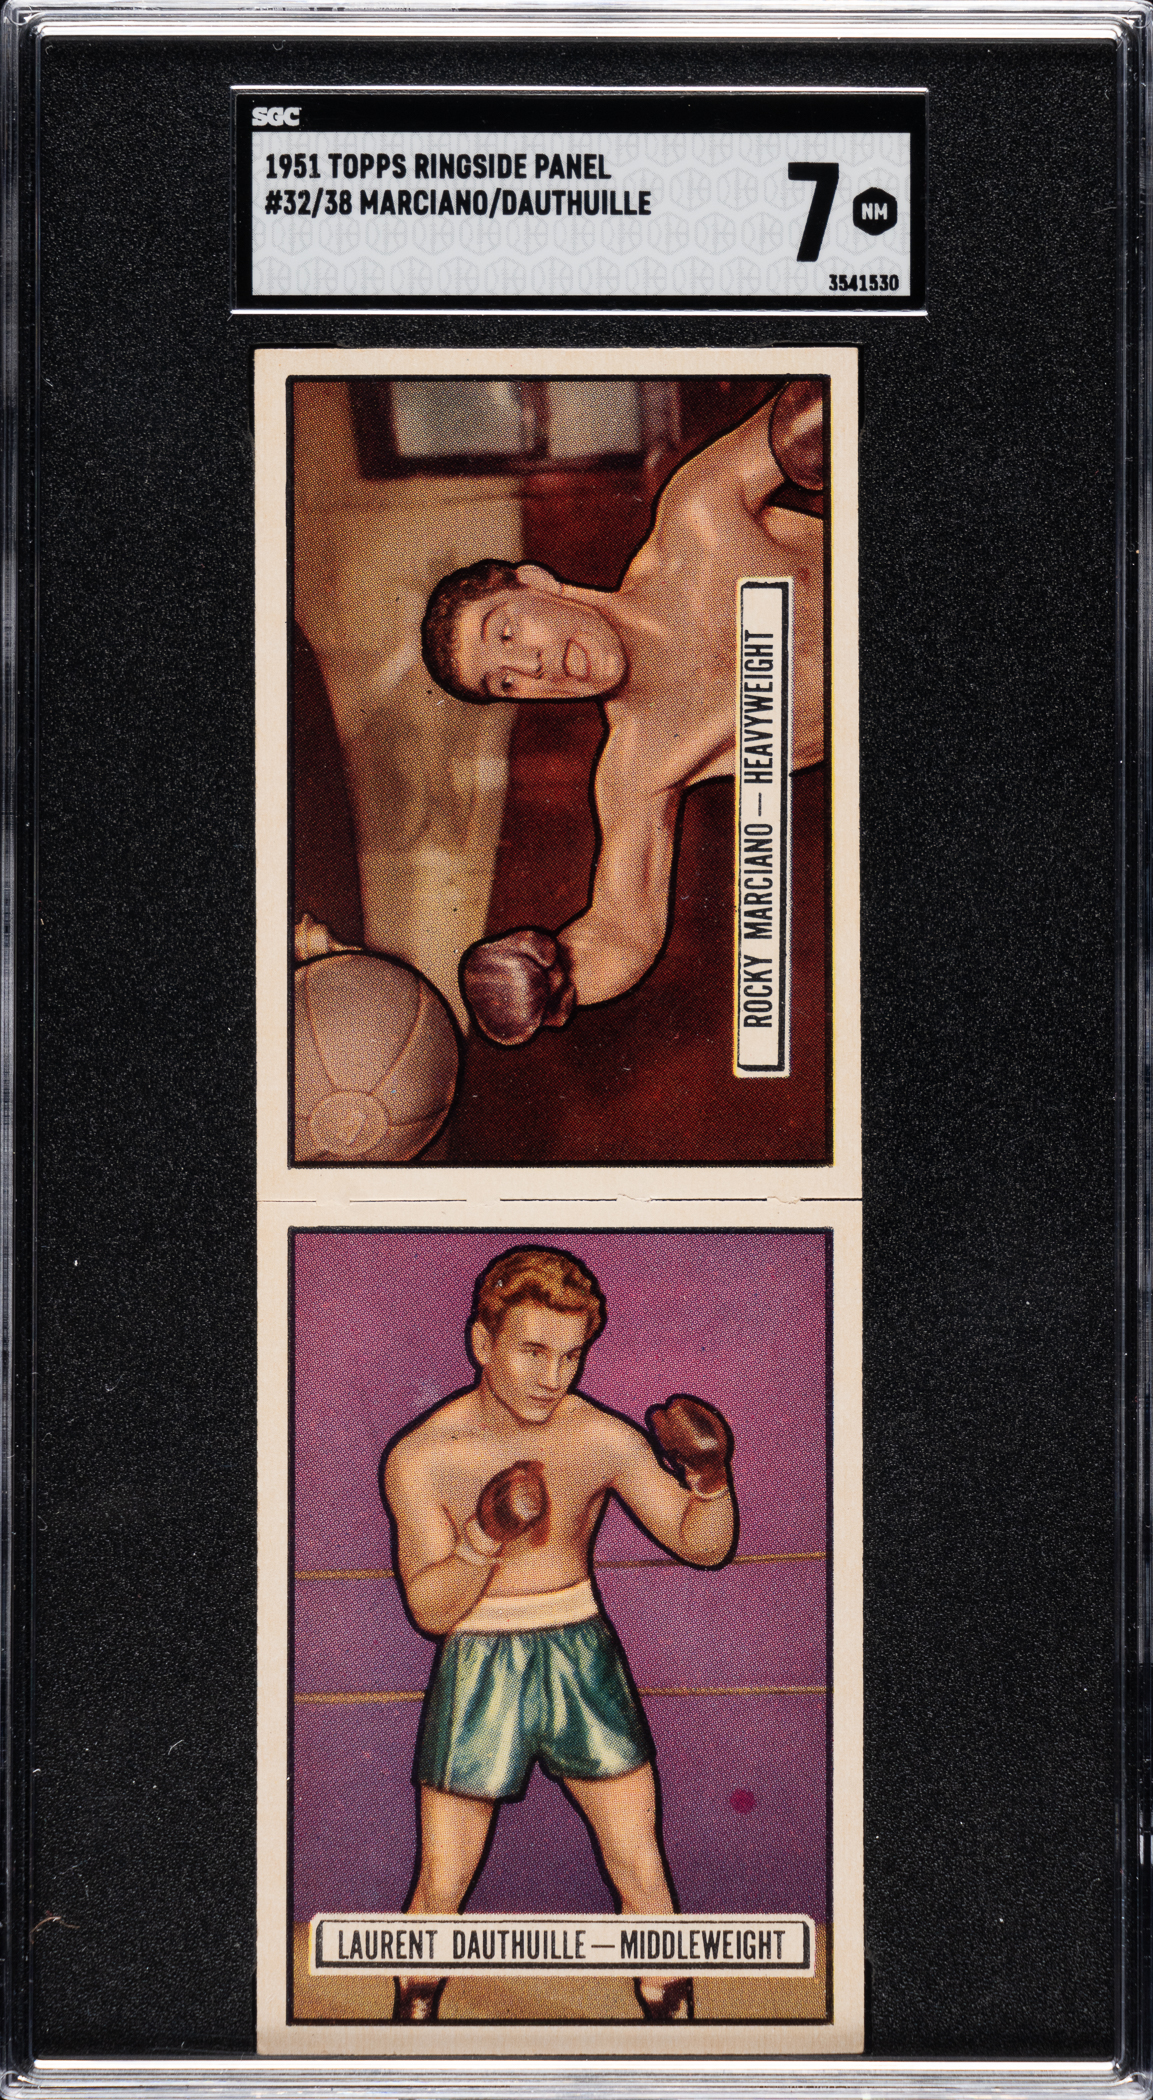 1951 Topps Ringside Boxing Panel #32/38 featuring Rocky Marciano and Laurent Dauthuille - SGC NM 7